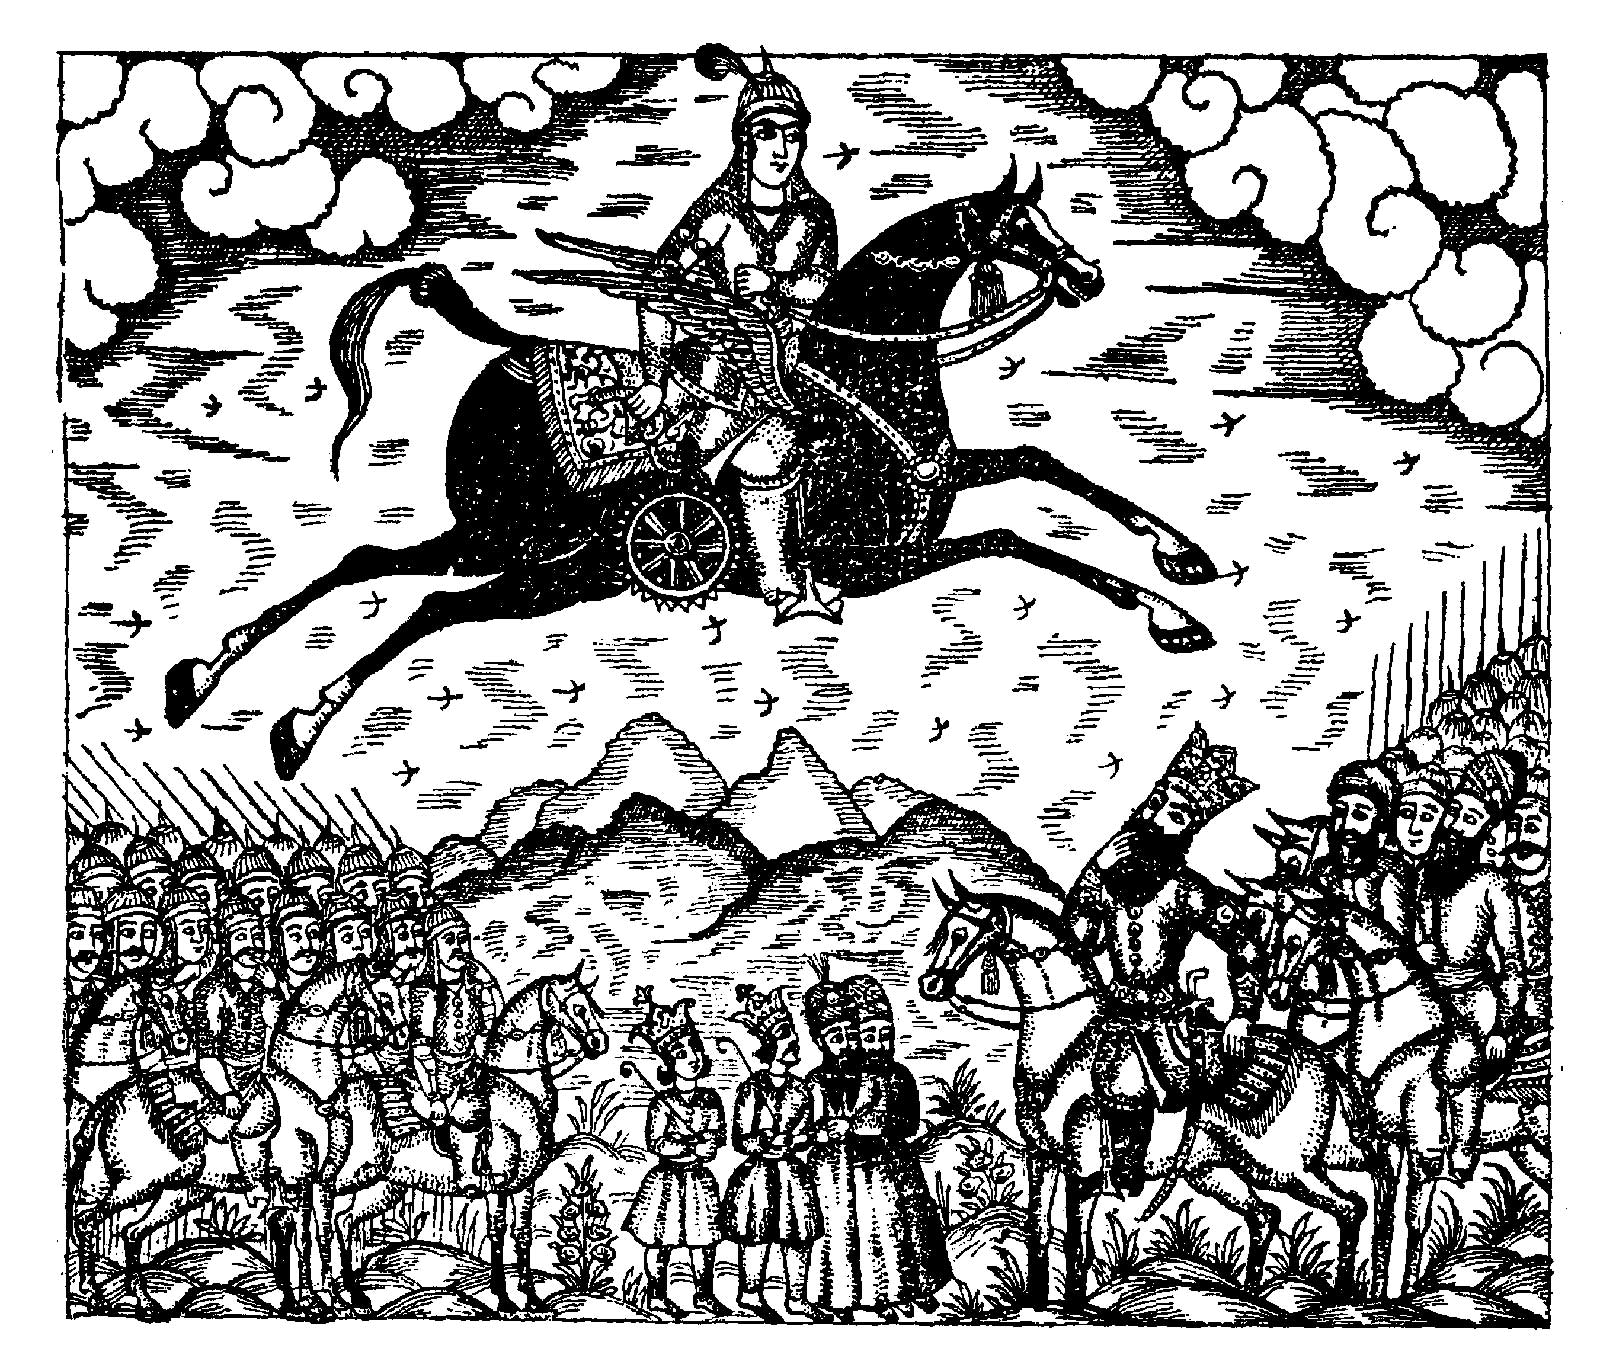 illustration of a man on a horse flying over an army of men